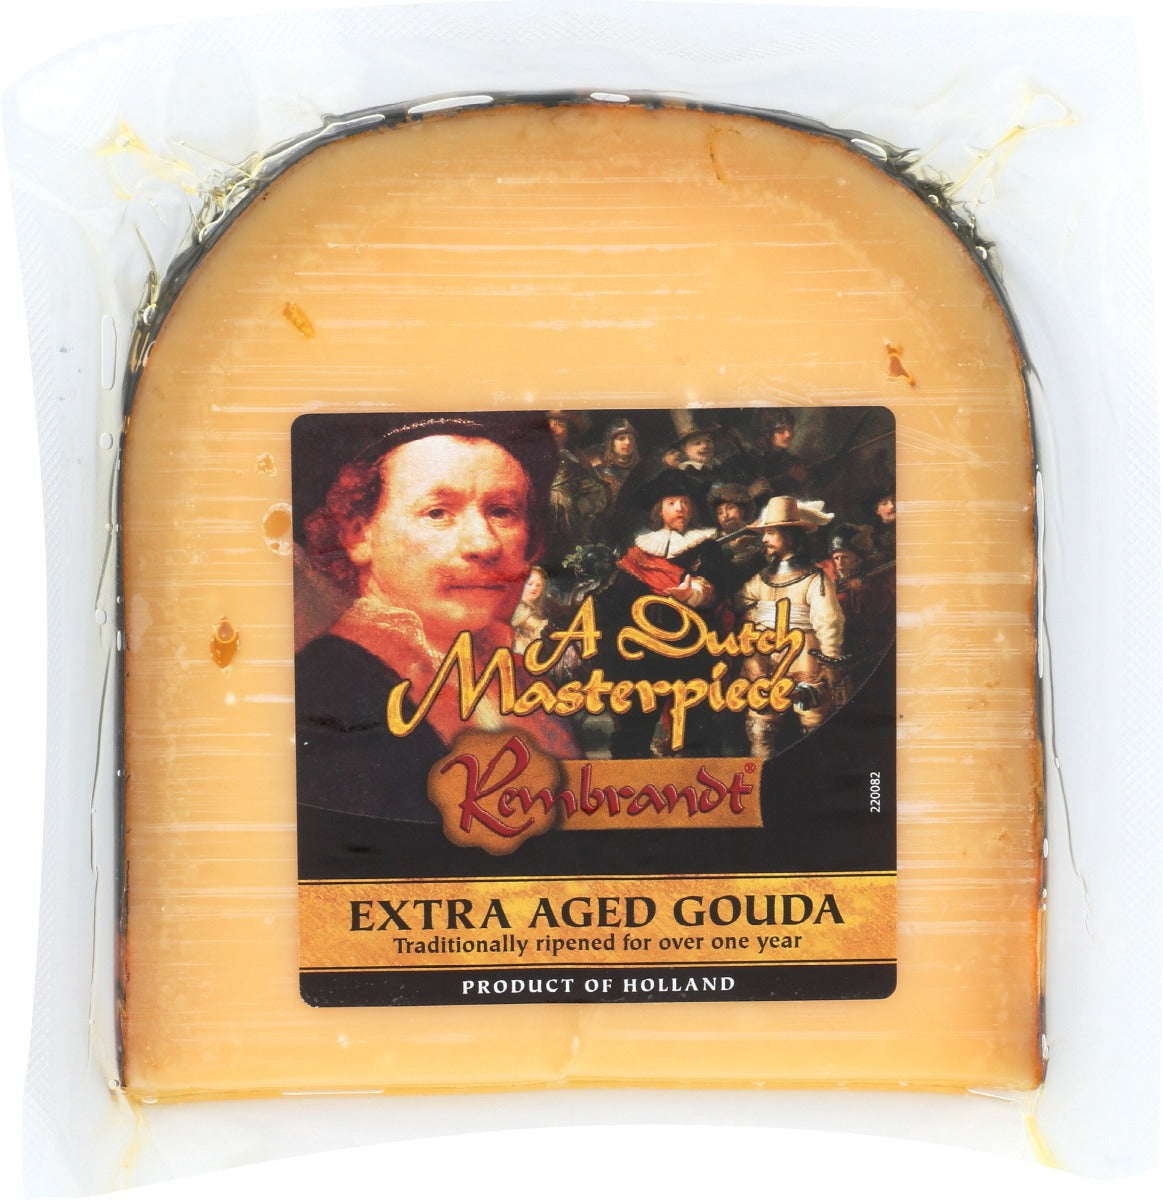 DUTCH MASTER: Rembrandt Extra Aged Gouda Cheese, 5.64 oz - Vending Business Solutions